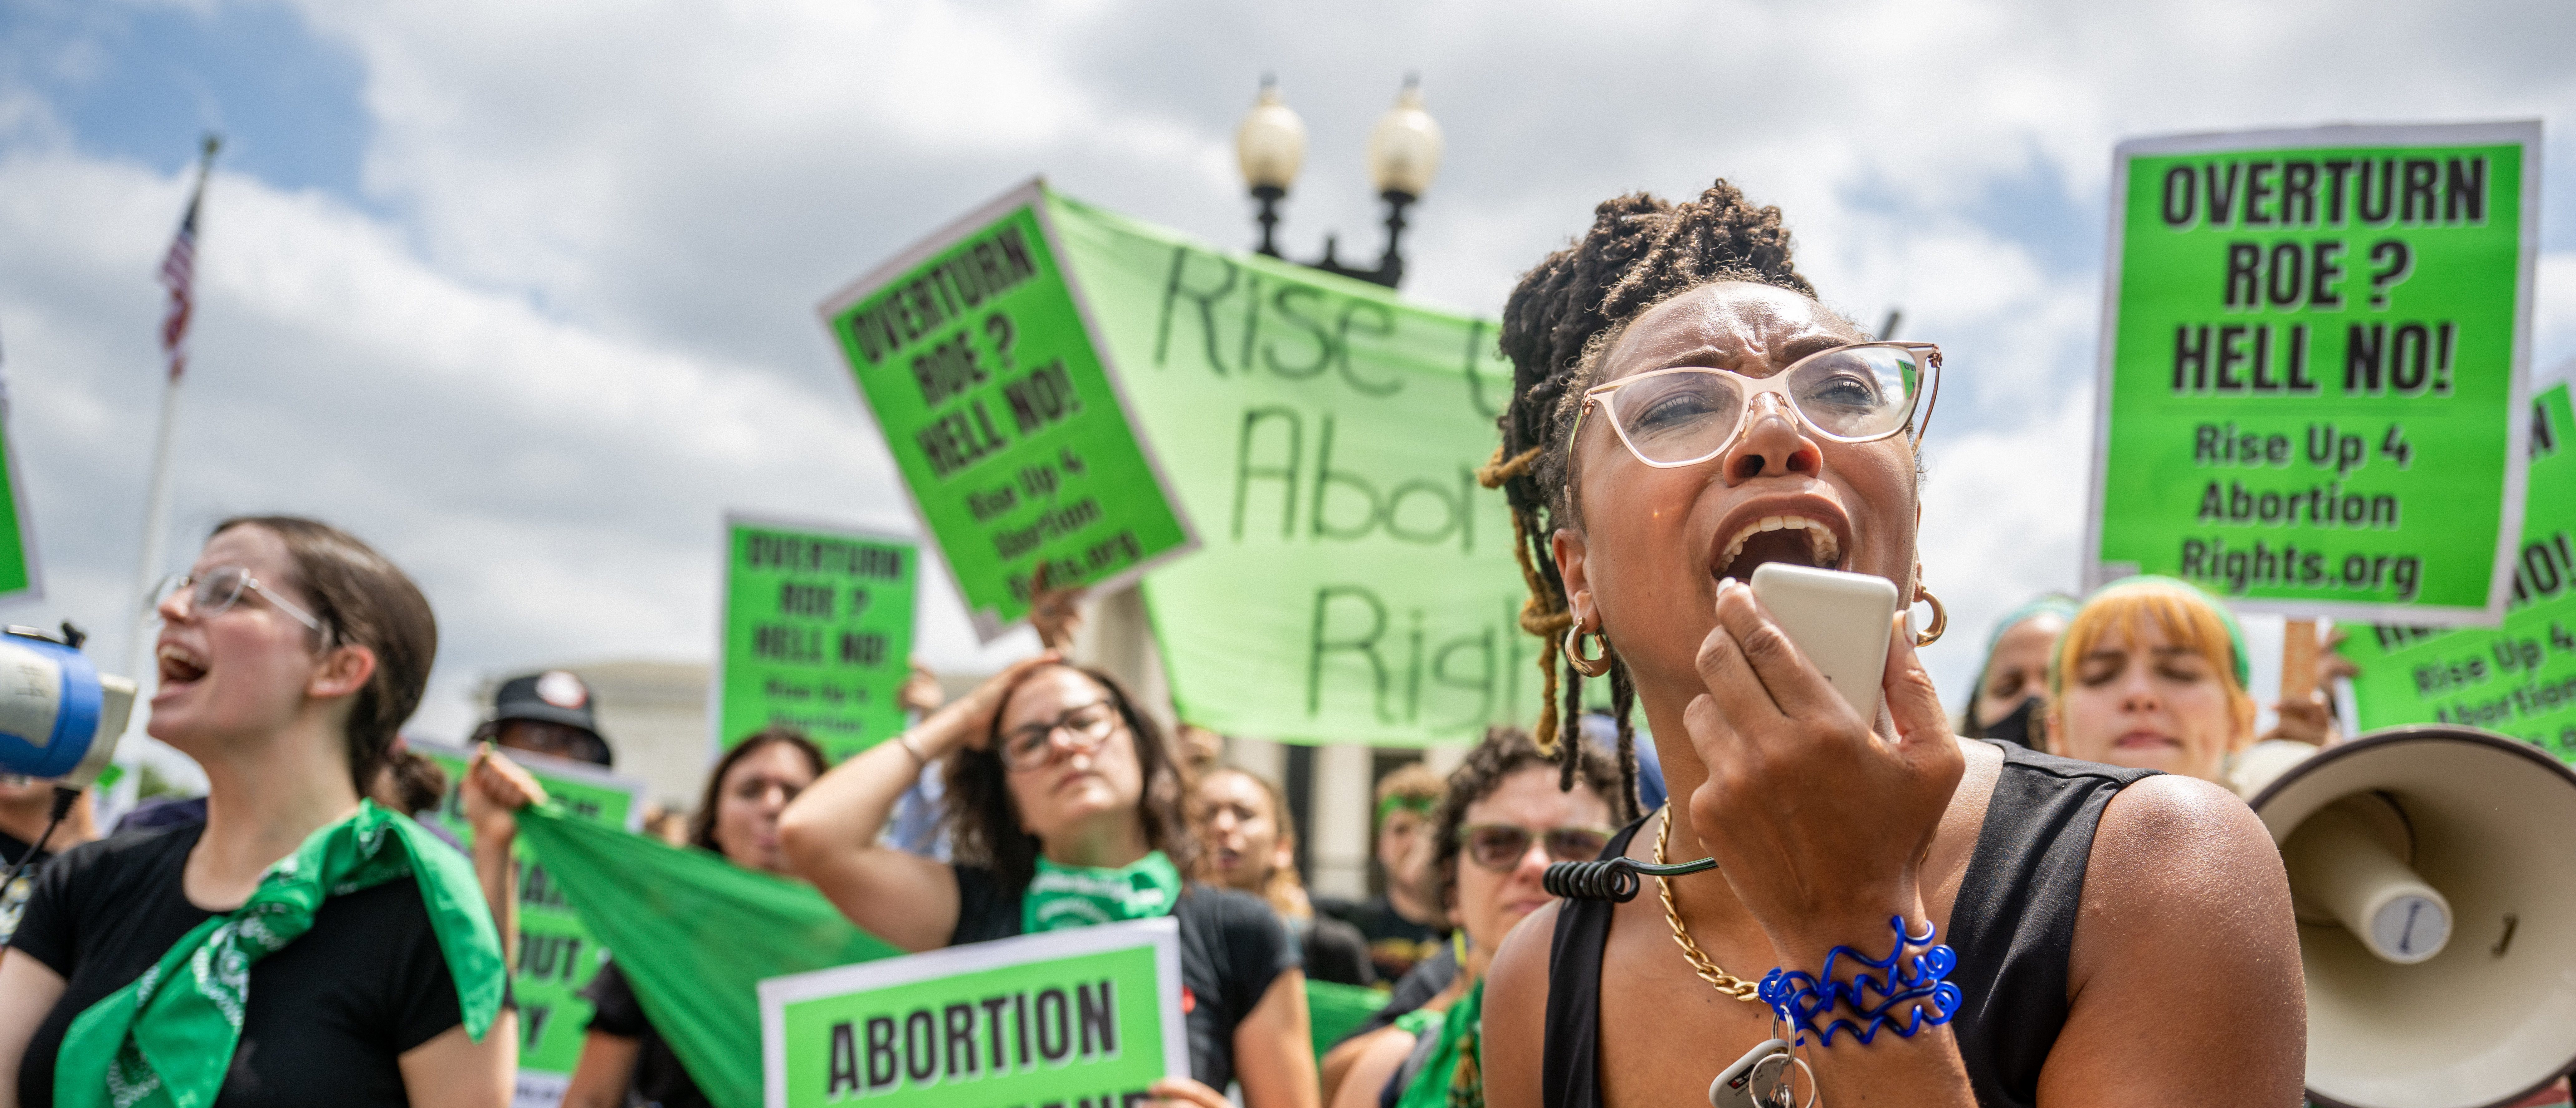 WASHINGTON, DC - JUNE 24: Abortion rights demonstrator Elizabeth White leads a chant in response to the Dobbs v Jackson Women's Health Organization ruling in front of the U.S. Supreme Court on June 24, 2022 in Washington, DC.